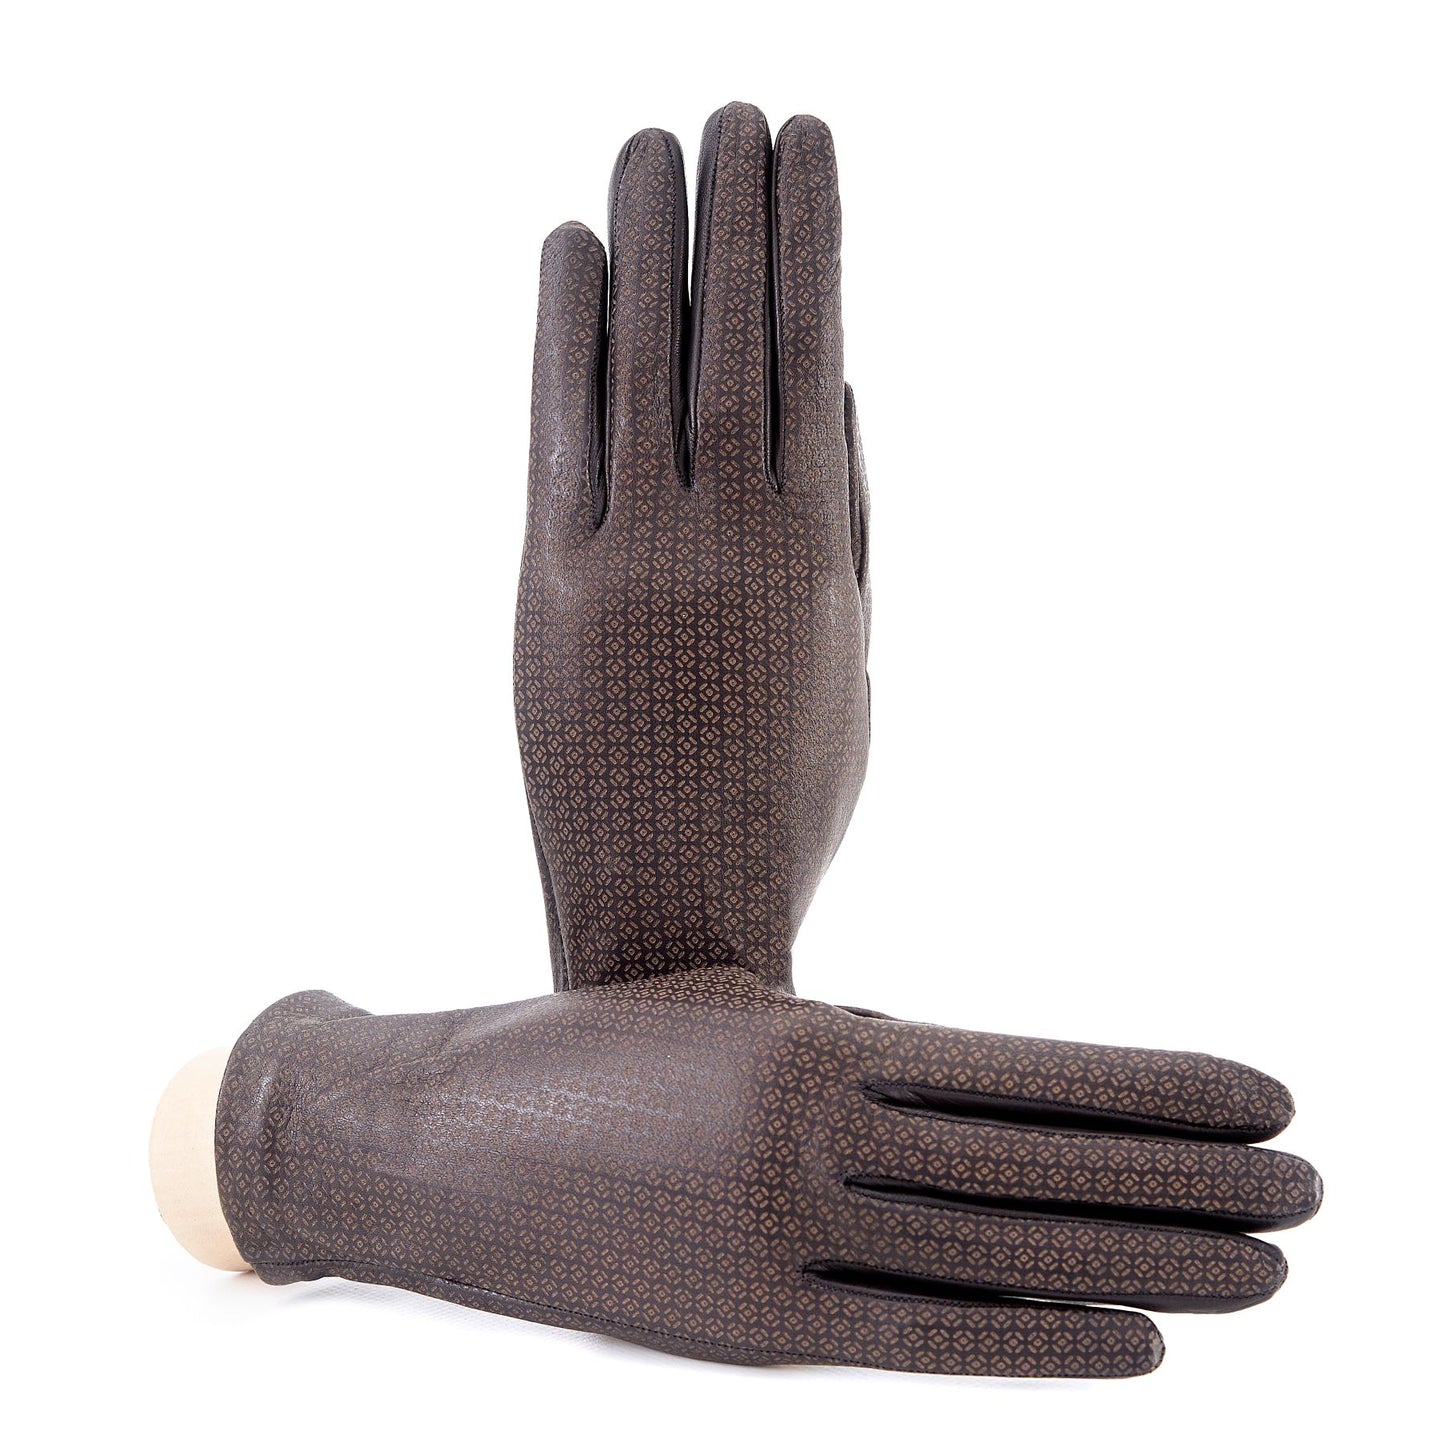 Women's unlined black nappa leather gloves with all over laser cut detail